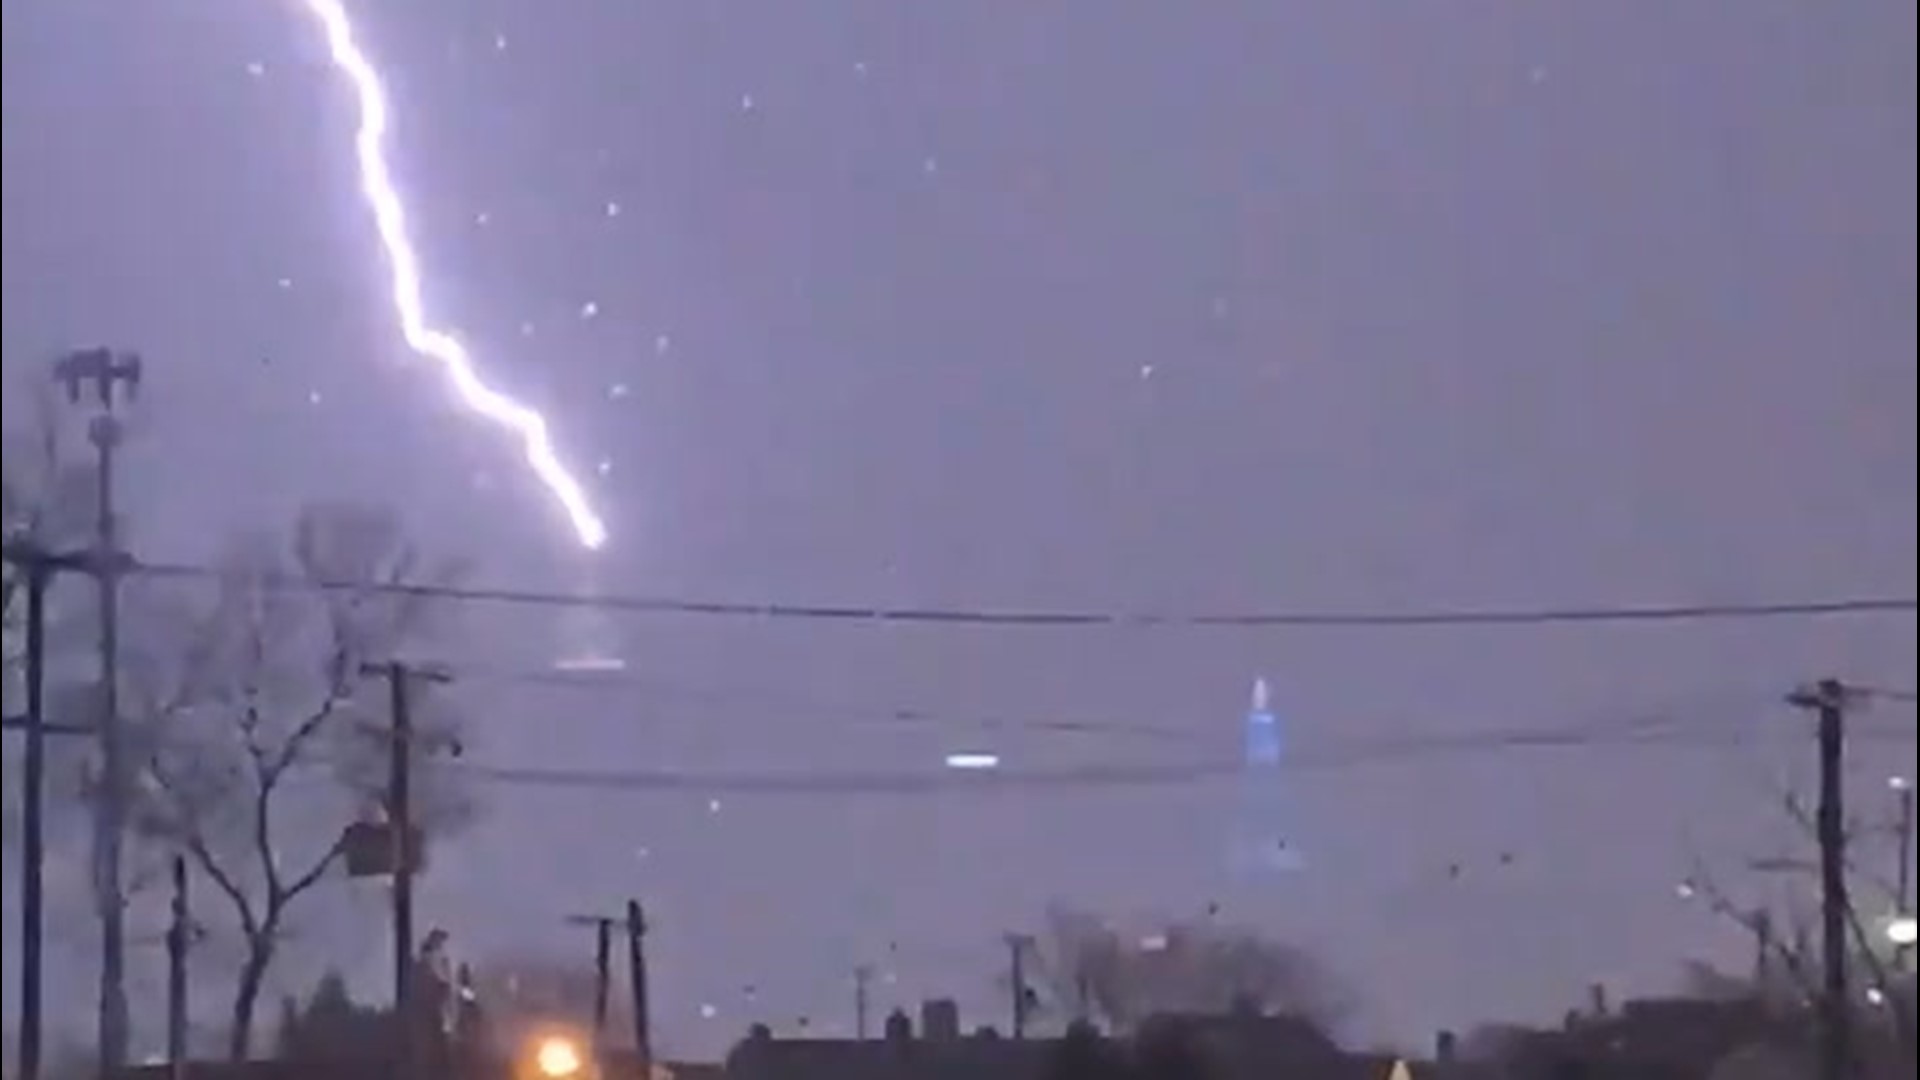 Severe weather swept through Ohio overnight, and there was plenty of lightning that flashed across the night sky on April 8 over Lake Erie.